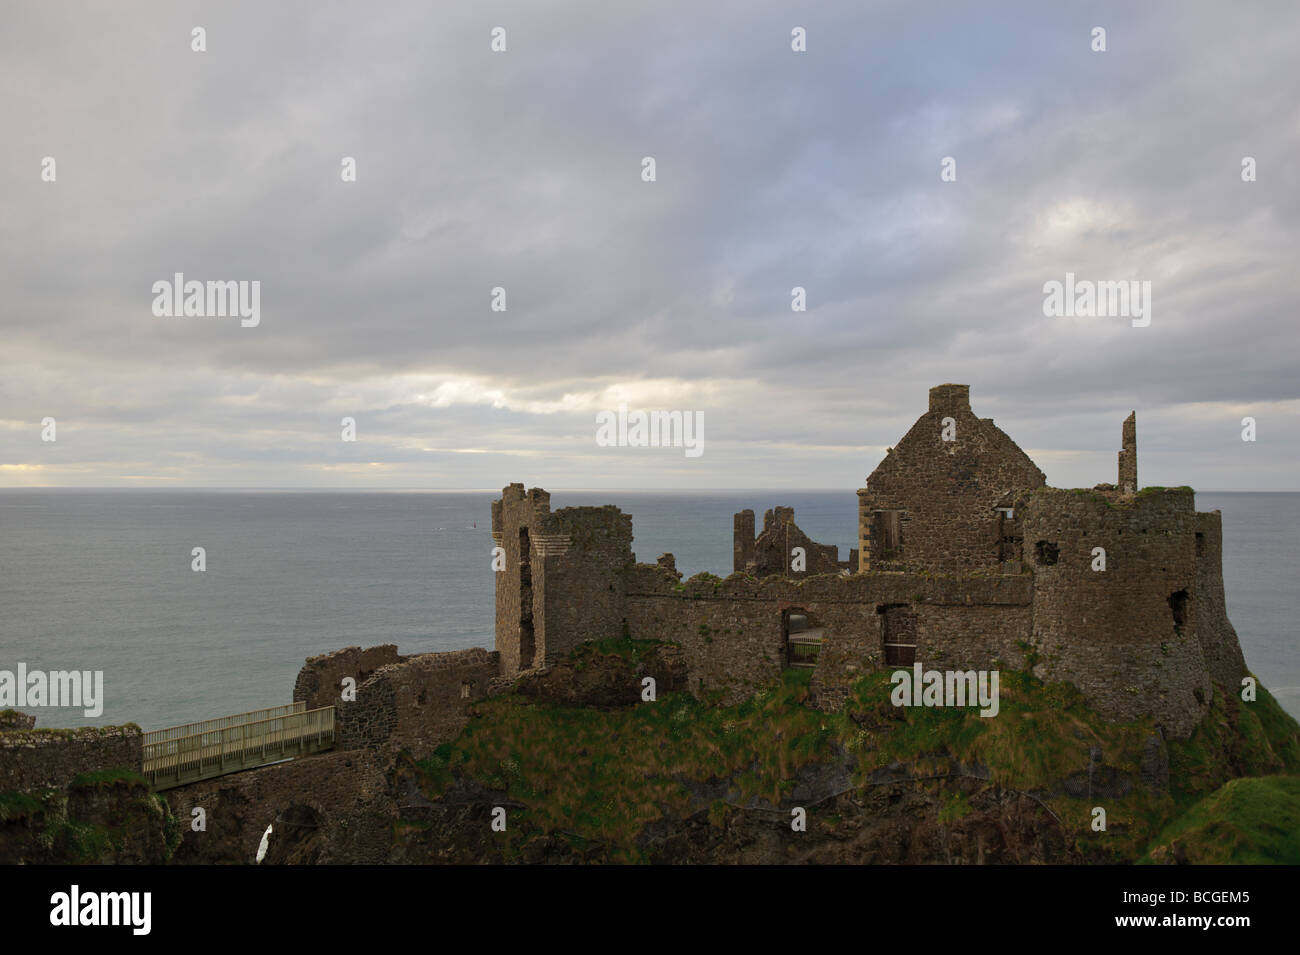 Dunluce castle and cliffs in County Antrim in Northern Ireland Stock Photo